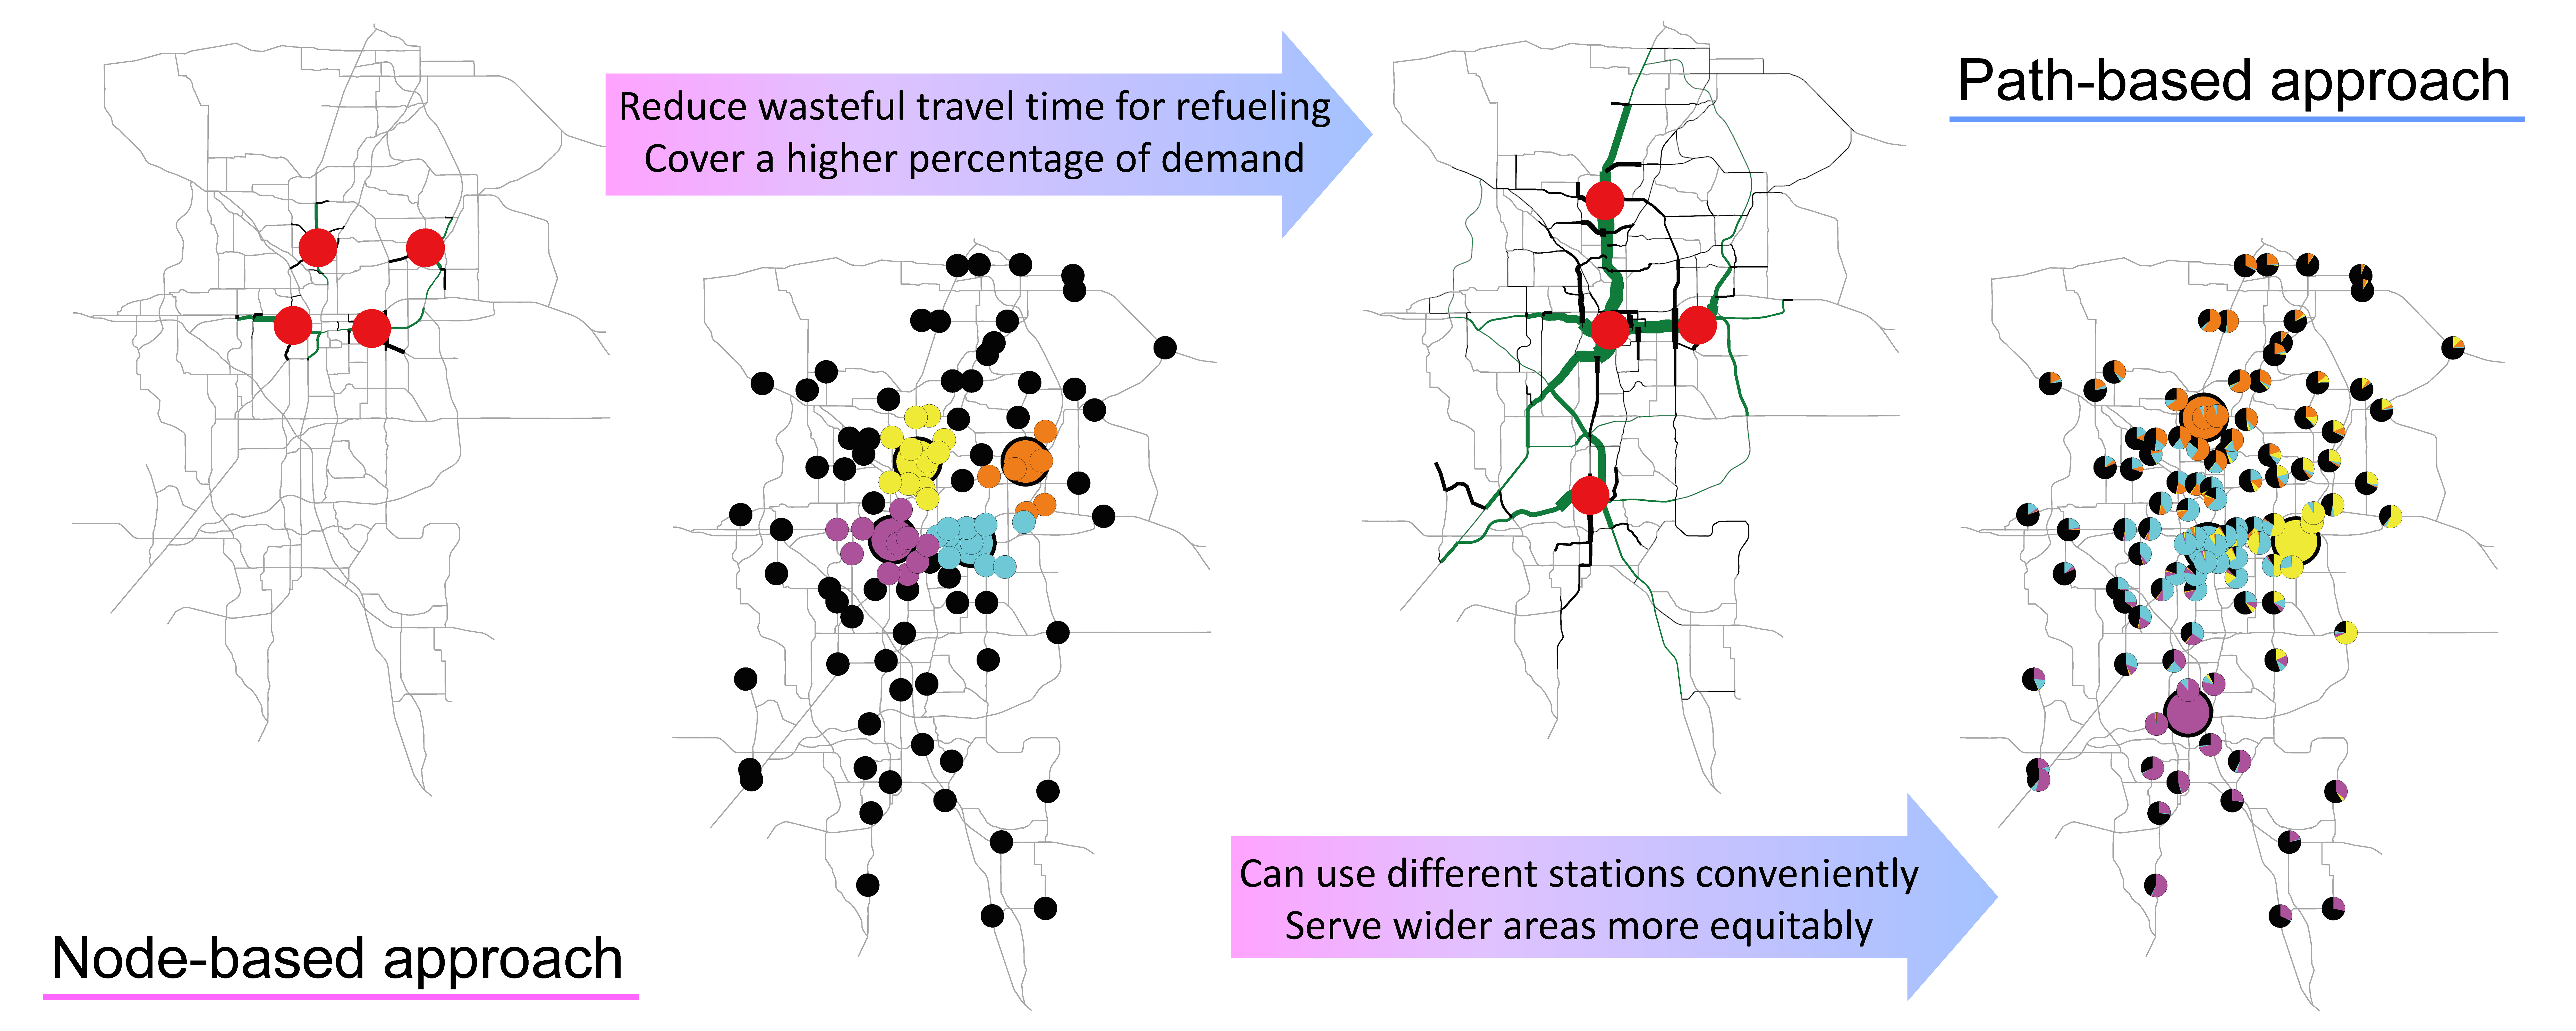 Social activity changes based on optimal placements of hydrogen fuel stations